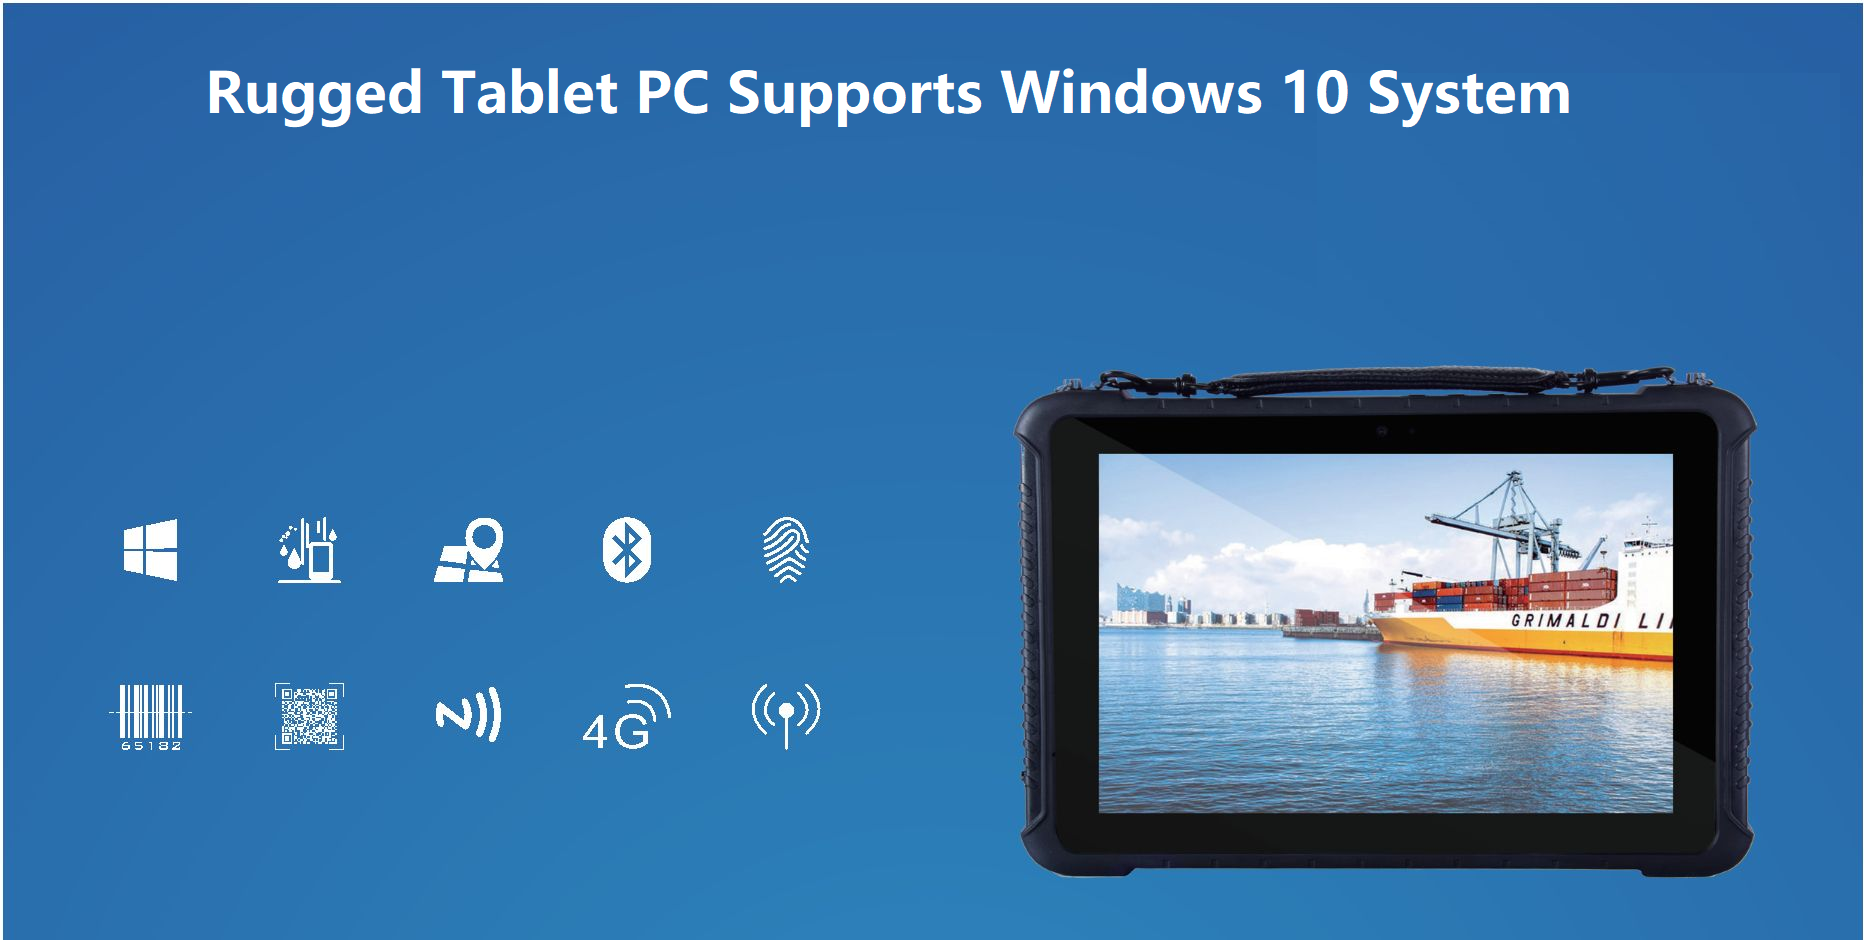 10.1inch rugged tablet PC data Windows